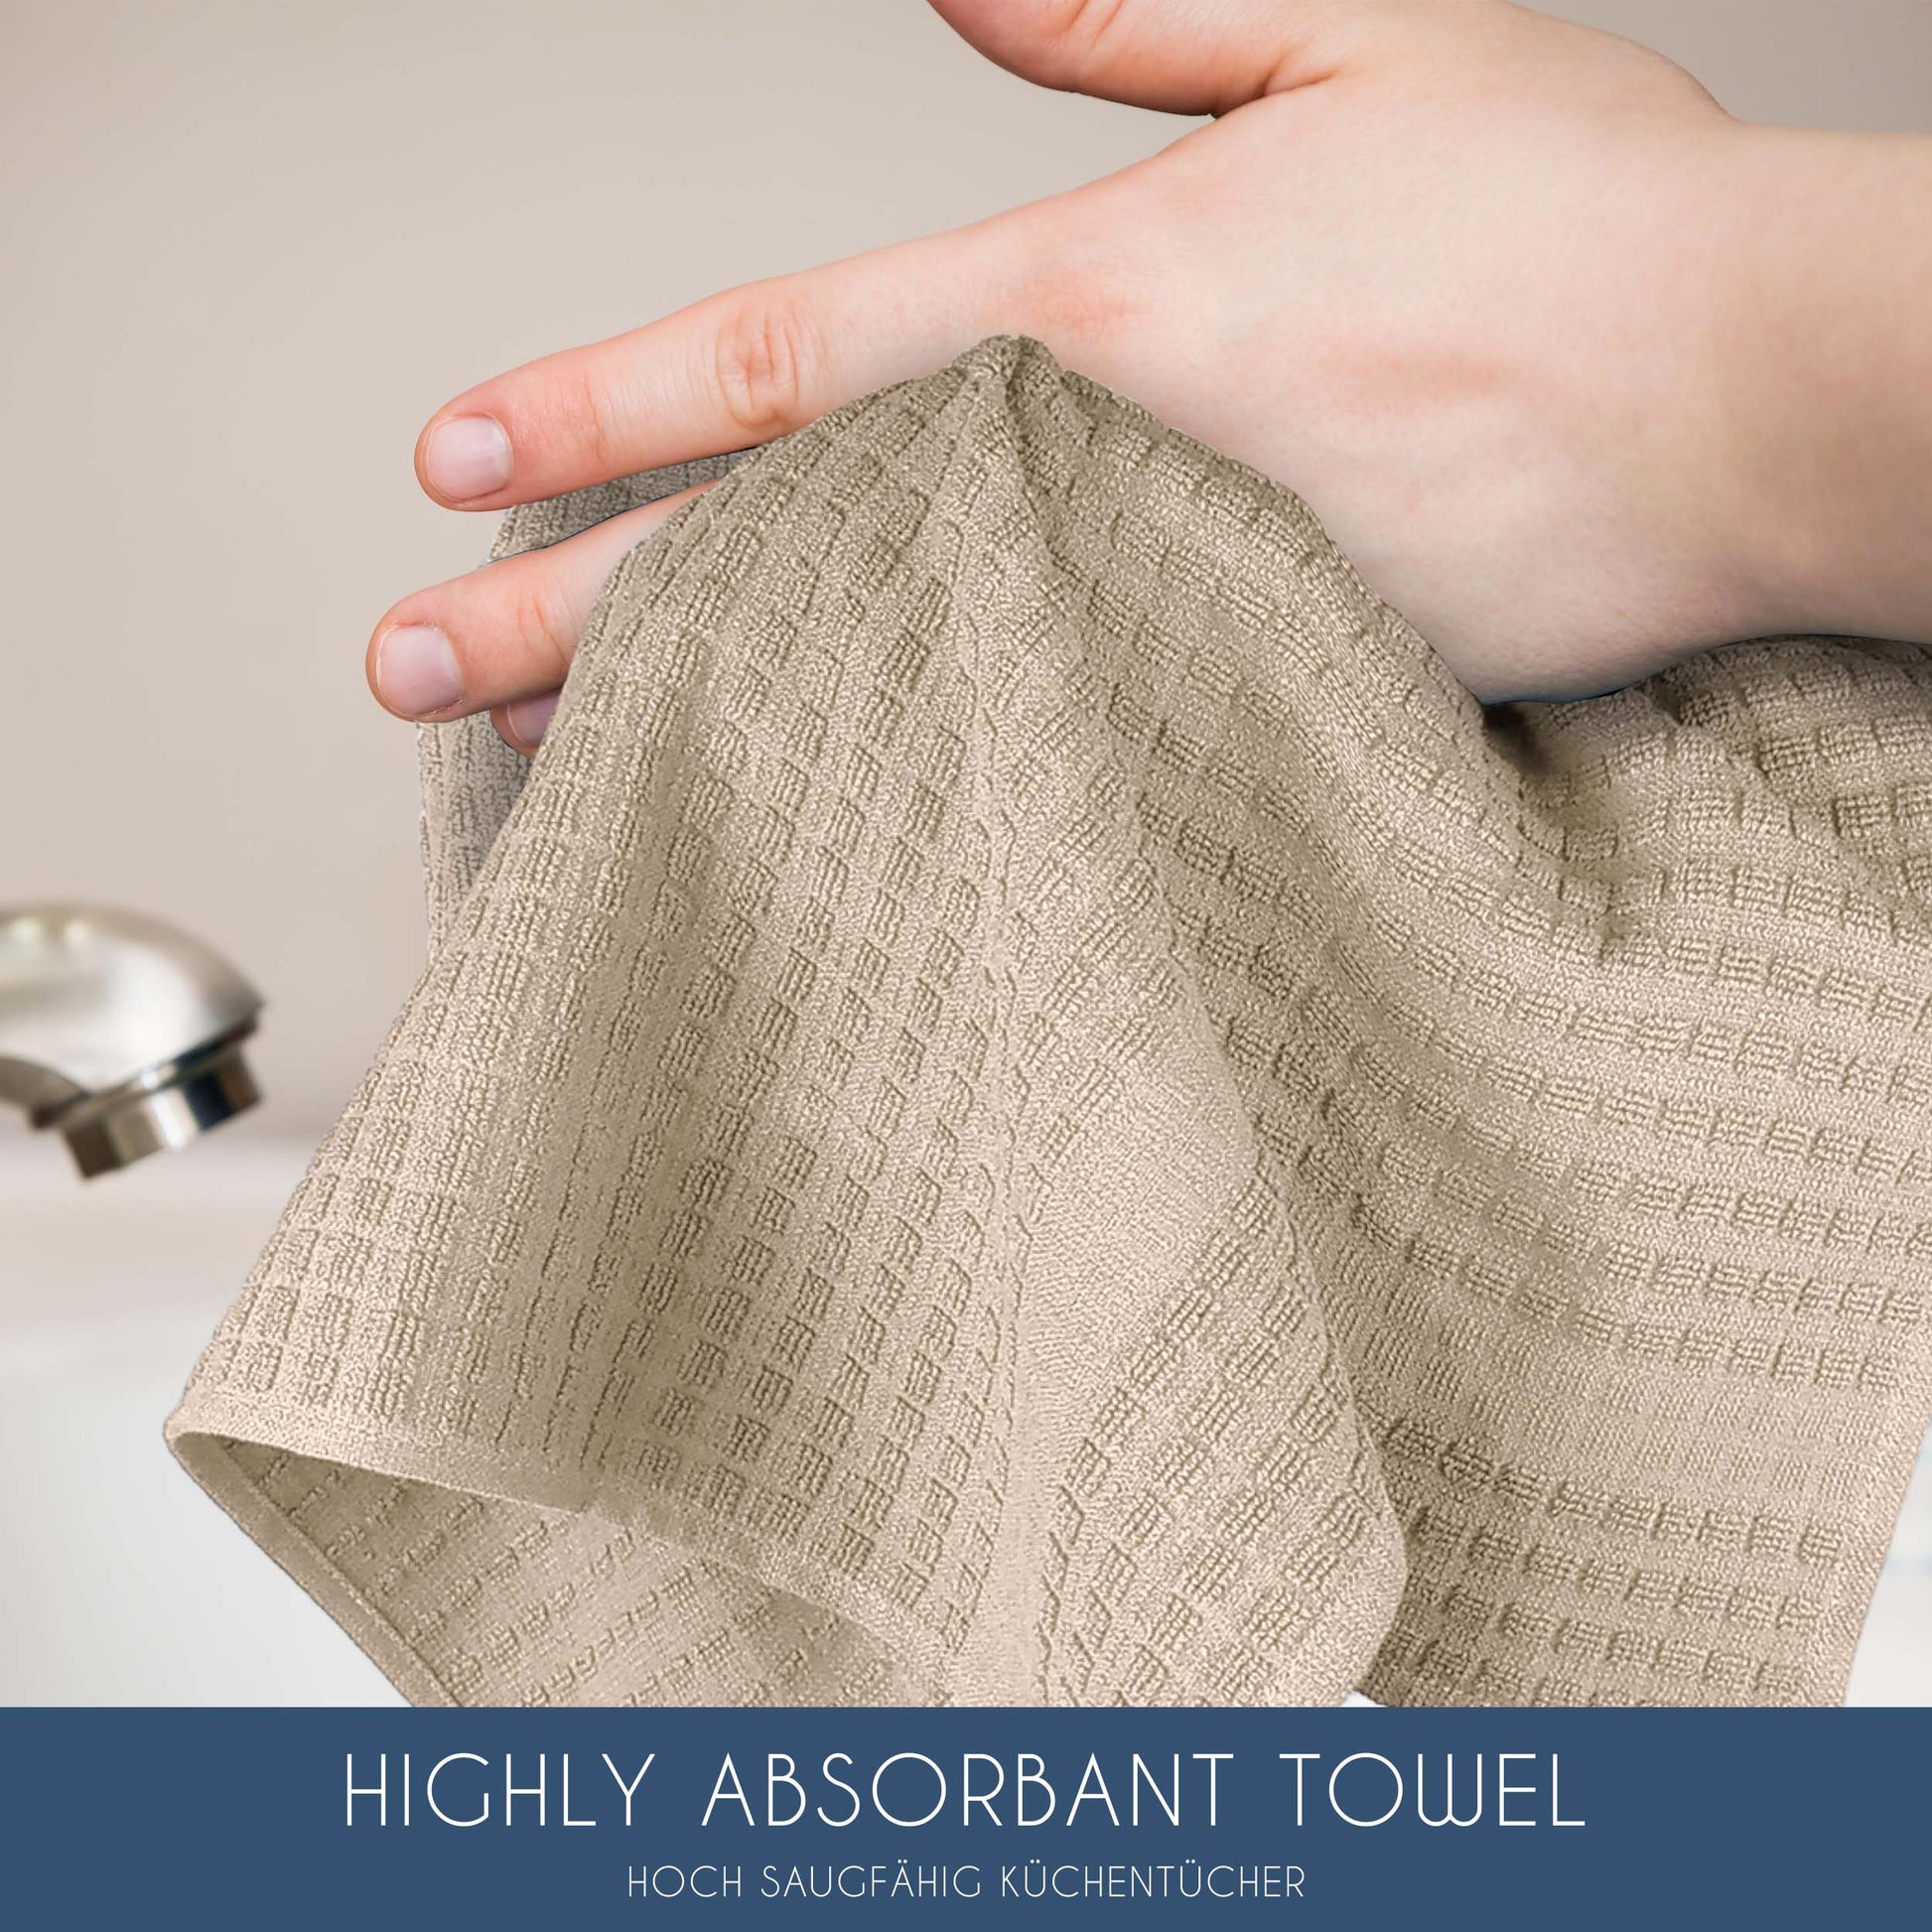 Hipruict Hand Towel with Hanging Loop, Set of 5 Hand Towels with Hanging  Loop.Strongly Absorbent Hand Towels in Soft Microfibre with a Wheat Spike